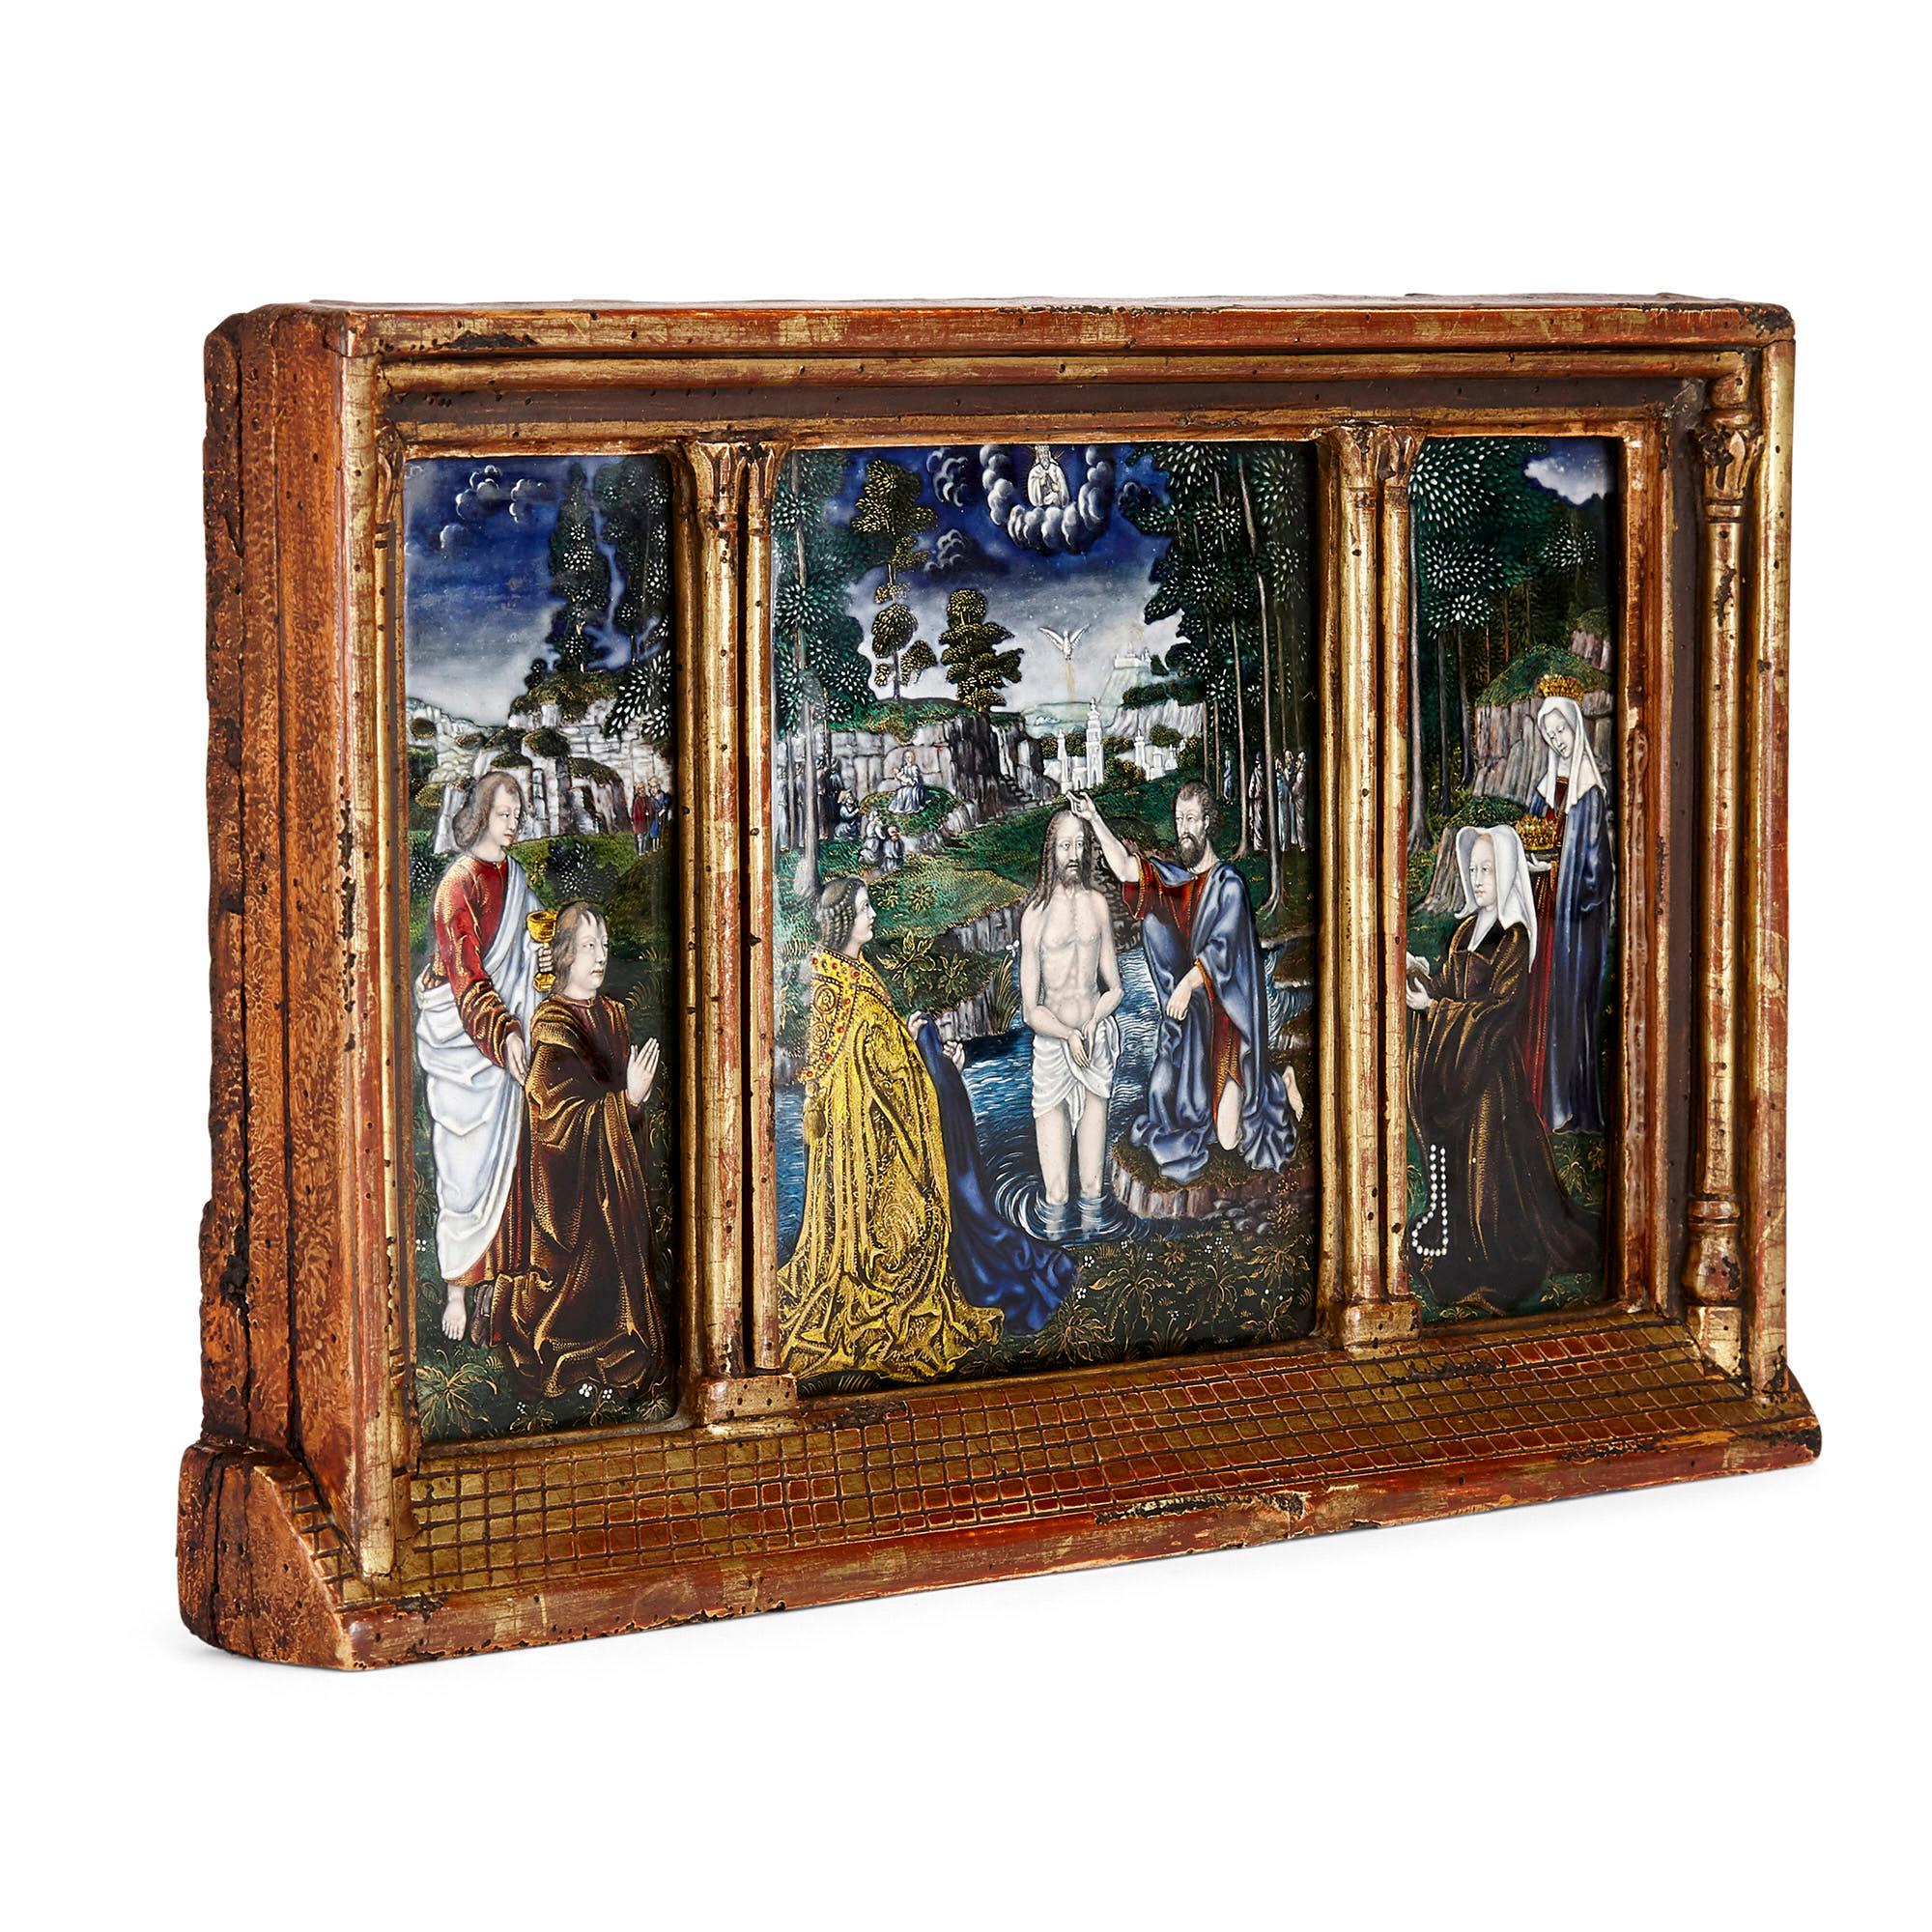 Limoges enamel plaque after Gerard David's Baptism of Christ
French, 19th century
Measures: Height 21cm, width 33cm, depth 4cm

Composed of three Limoges enamel plaques set into a giltwood frame, this superb object is a wonderful example of 19th